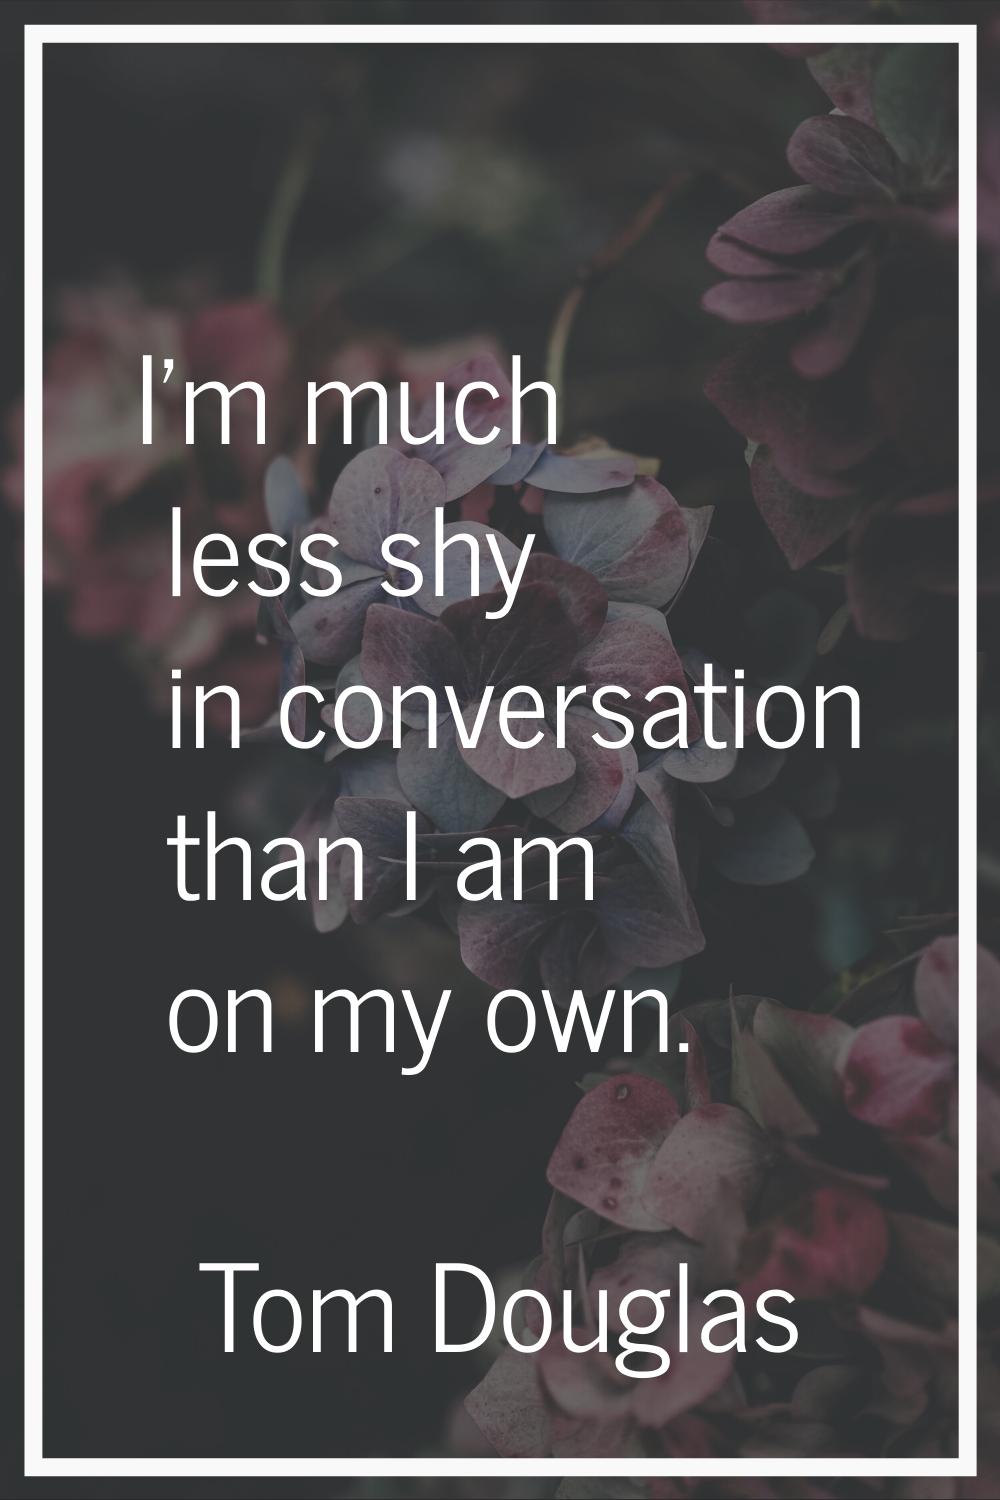 I'm much less shy in conversation than I am on my own.